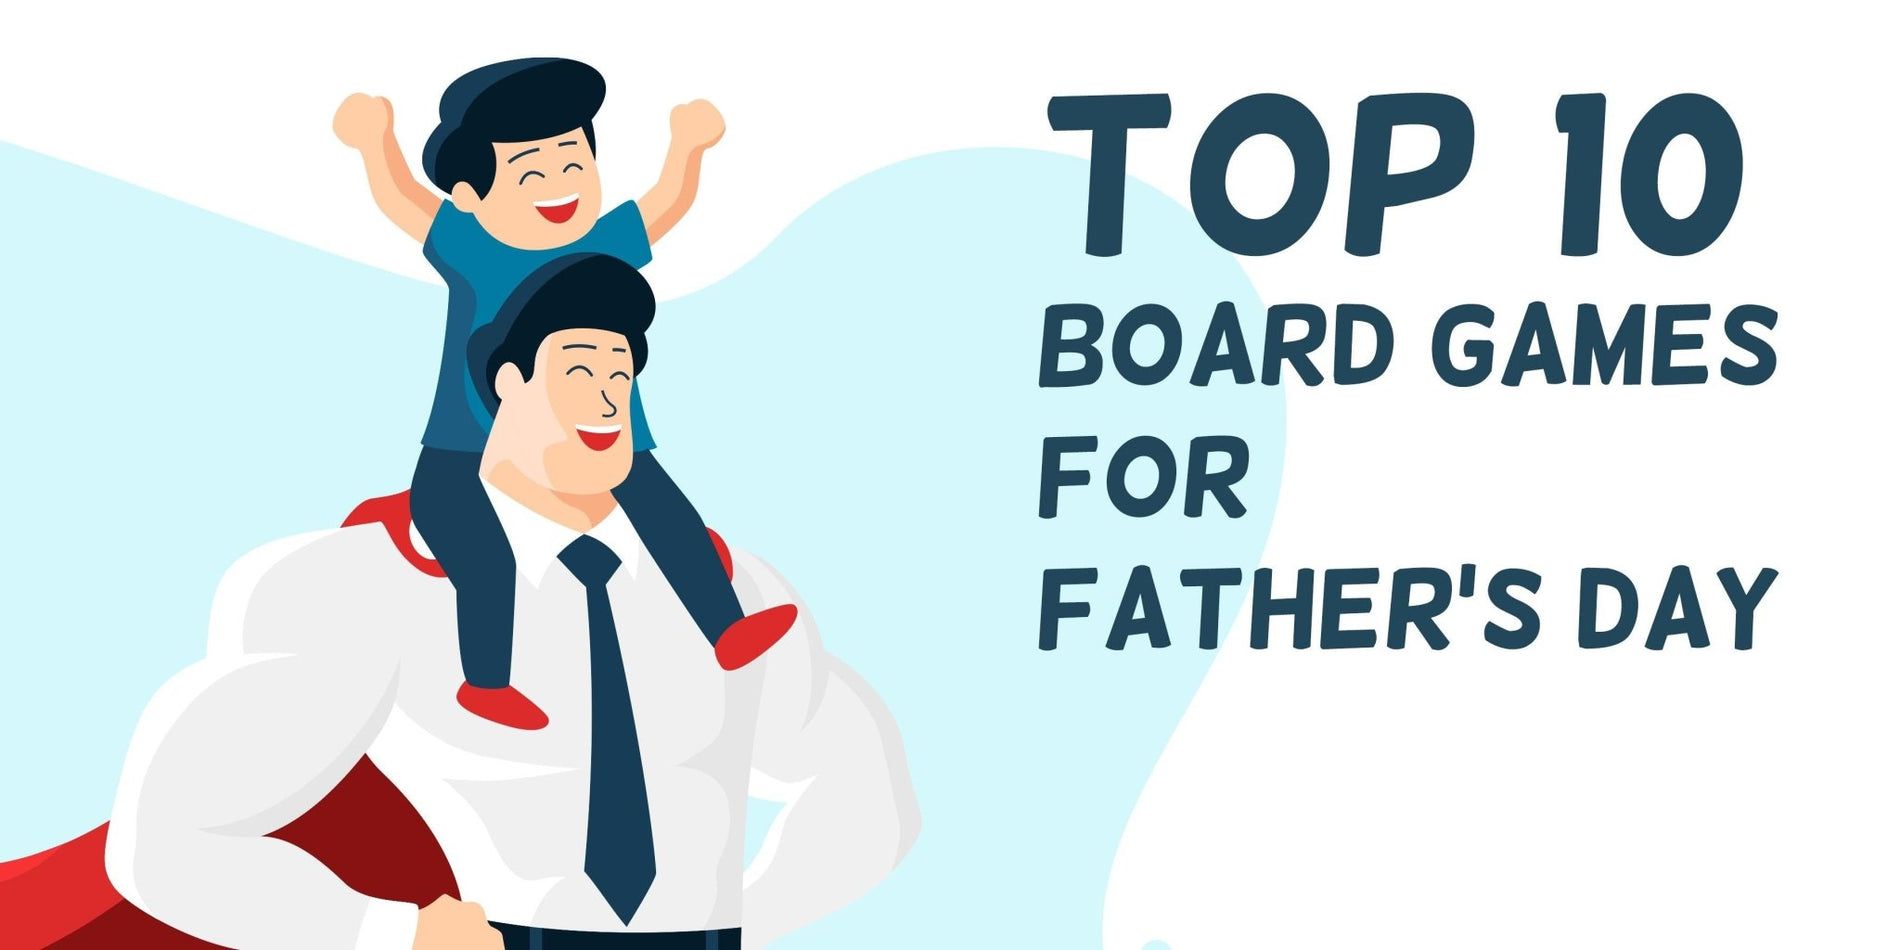 Top 10 Board Games for Father’s Day - Gaming Library